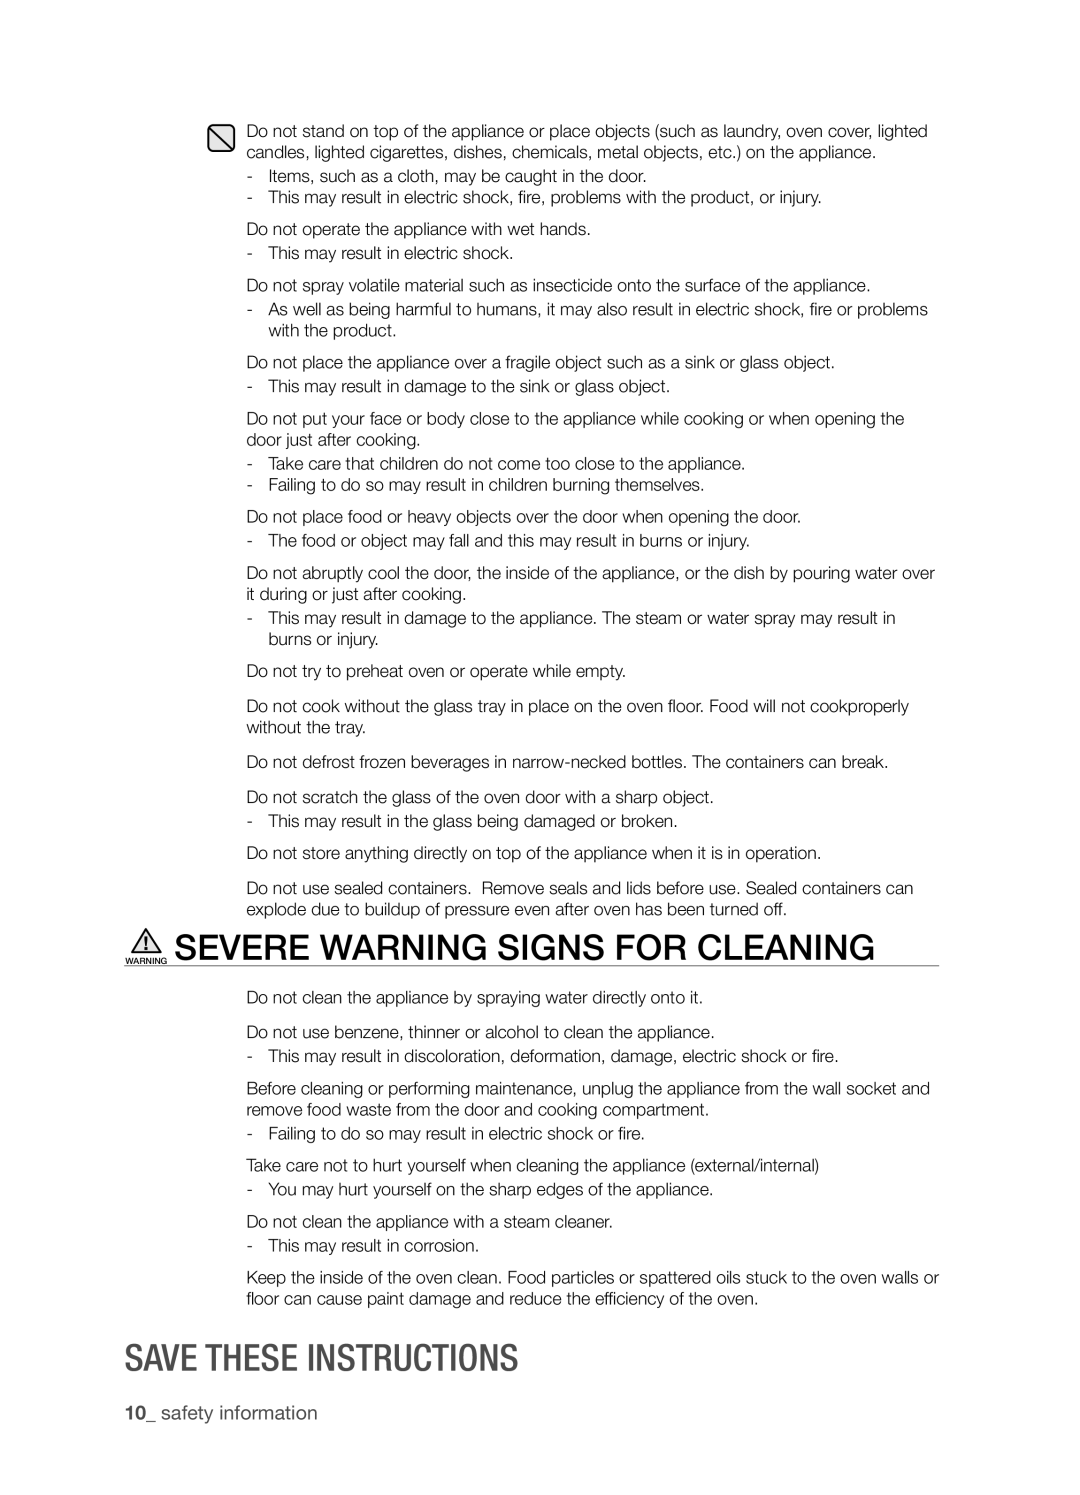 Samsung SMH8165STG user manual Warning Severe Warning Signs For Cleaning, Save these instructions, safety information 